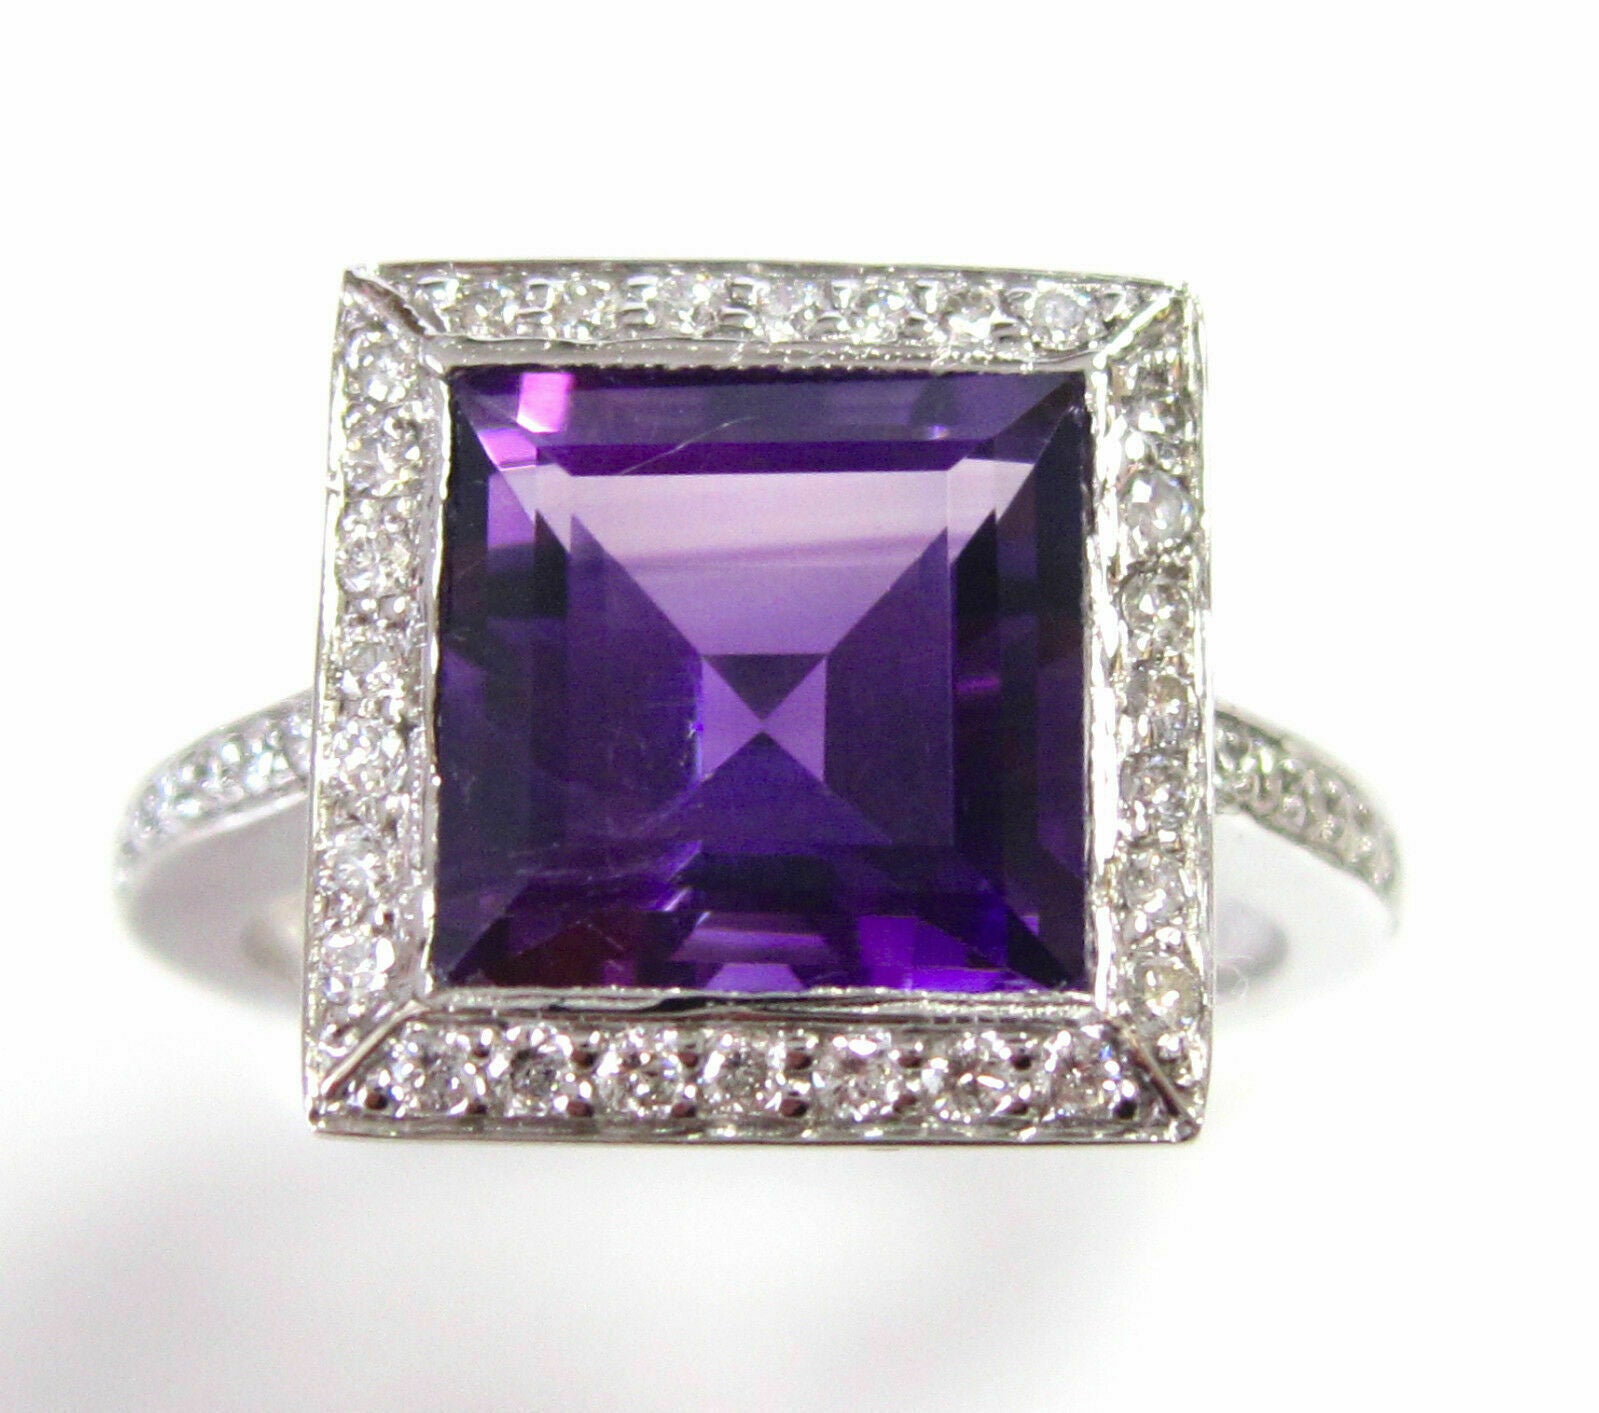 3.45TCW Natural Princes Cut Amethyst with Diamond Accents Solitaire Ring 14 W/G